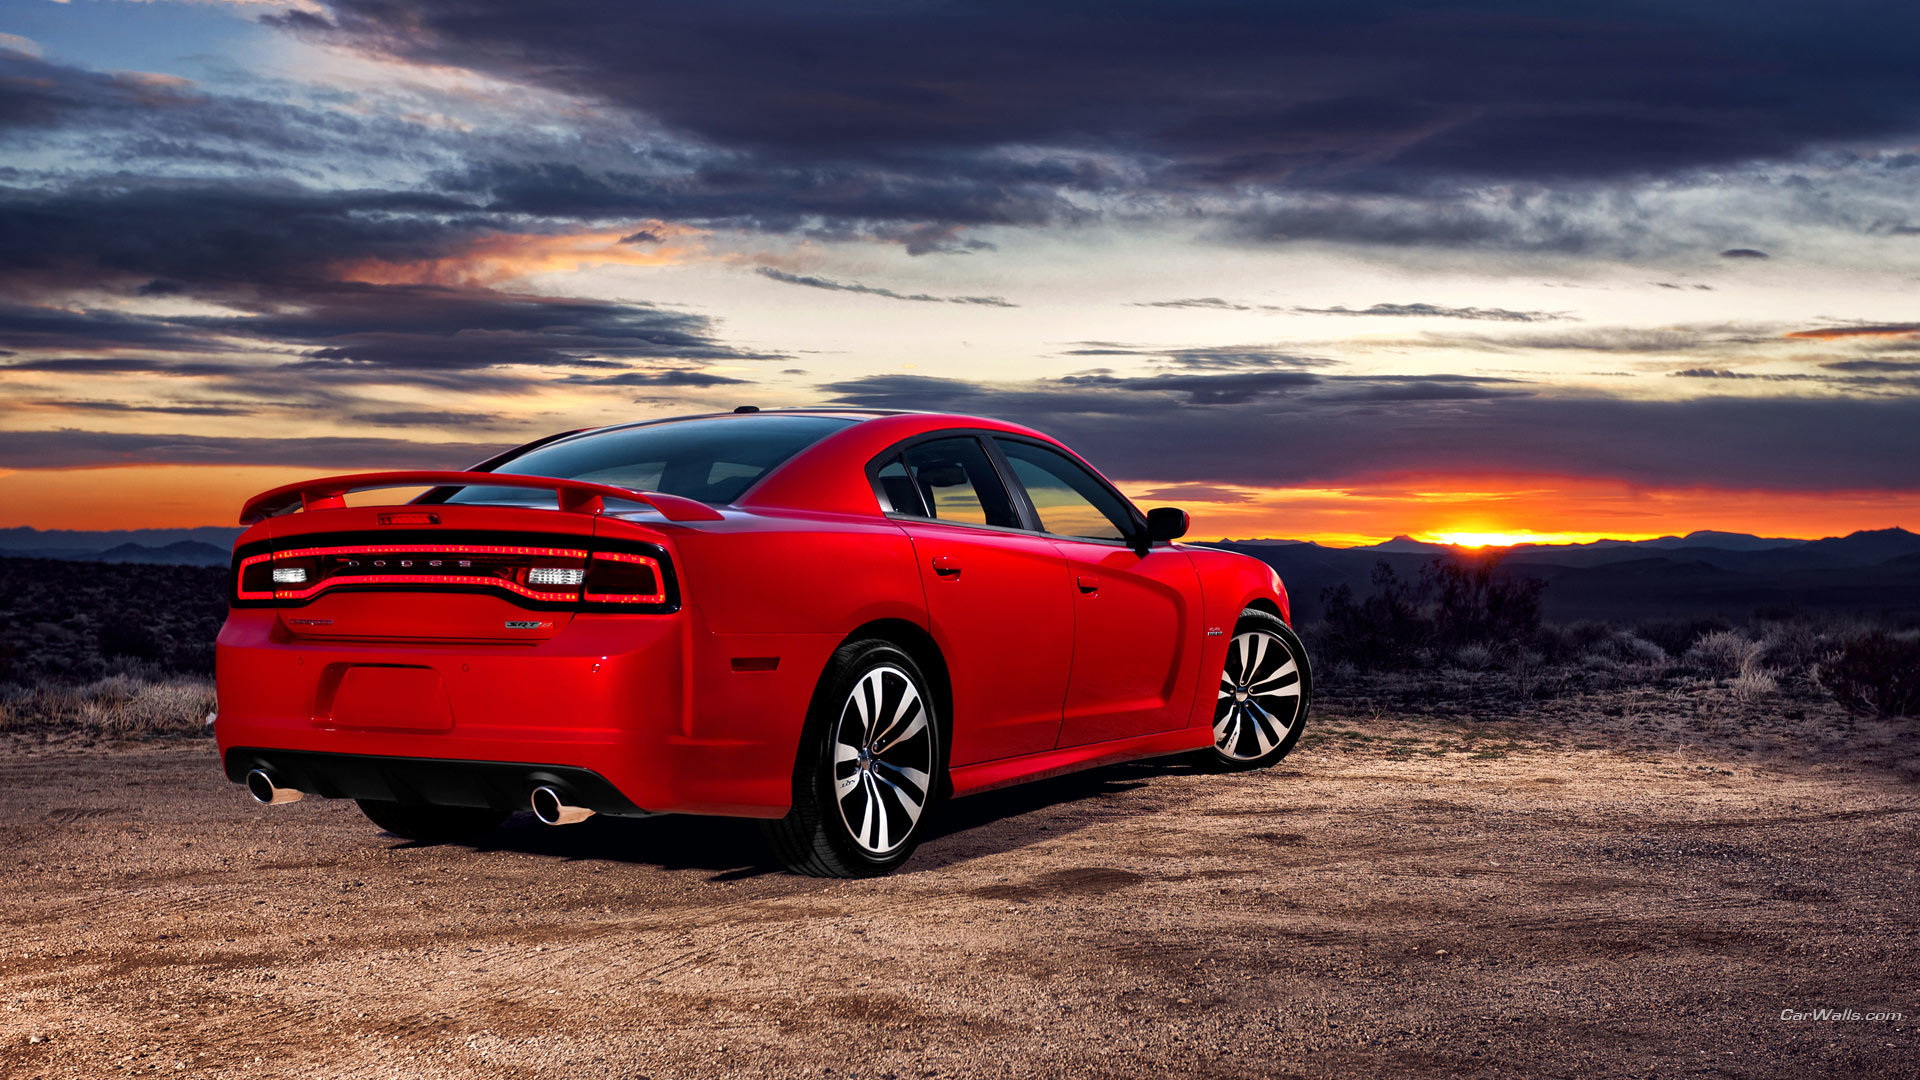 Download full hd 1920x1080 Dodge Charger Srt8 PC background ID:277915 for free